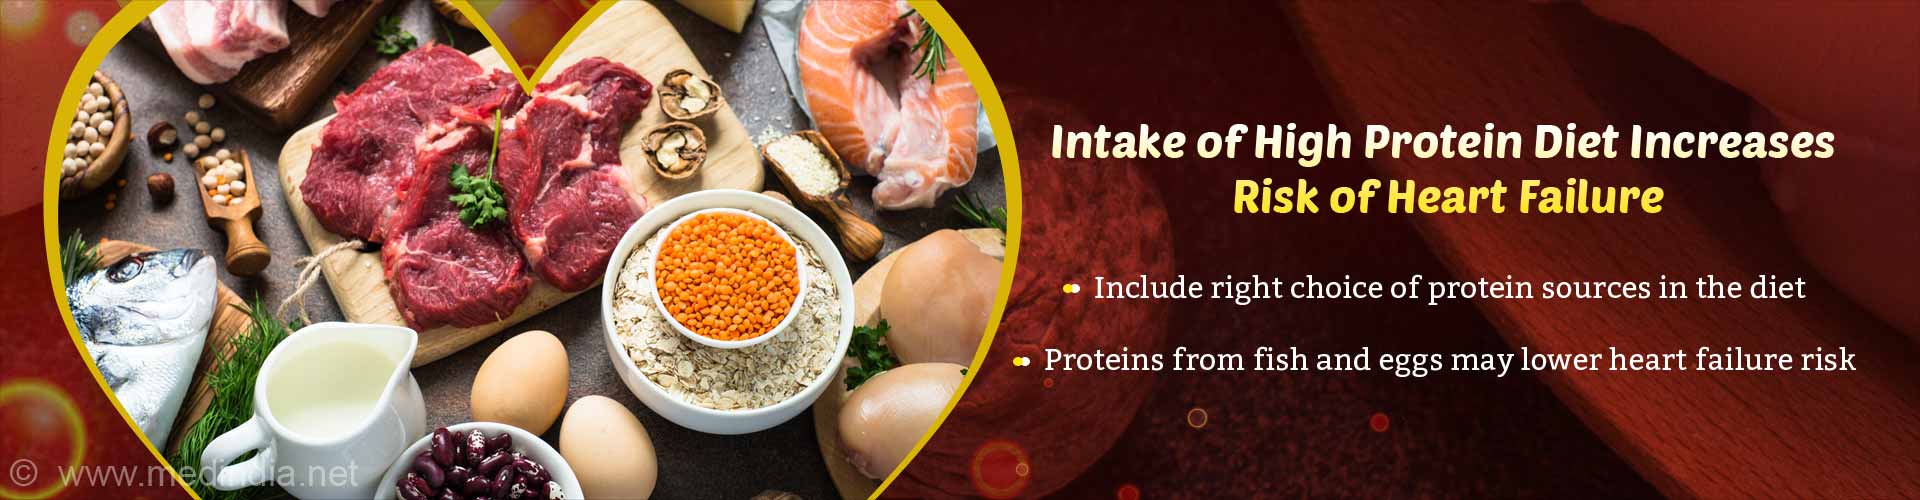 Intake of high protein diet increases risk of heart failure. Include right choice of protein sources in the diet. Proteins from fish and eggs may lower heart failure risk.